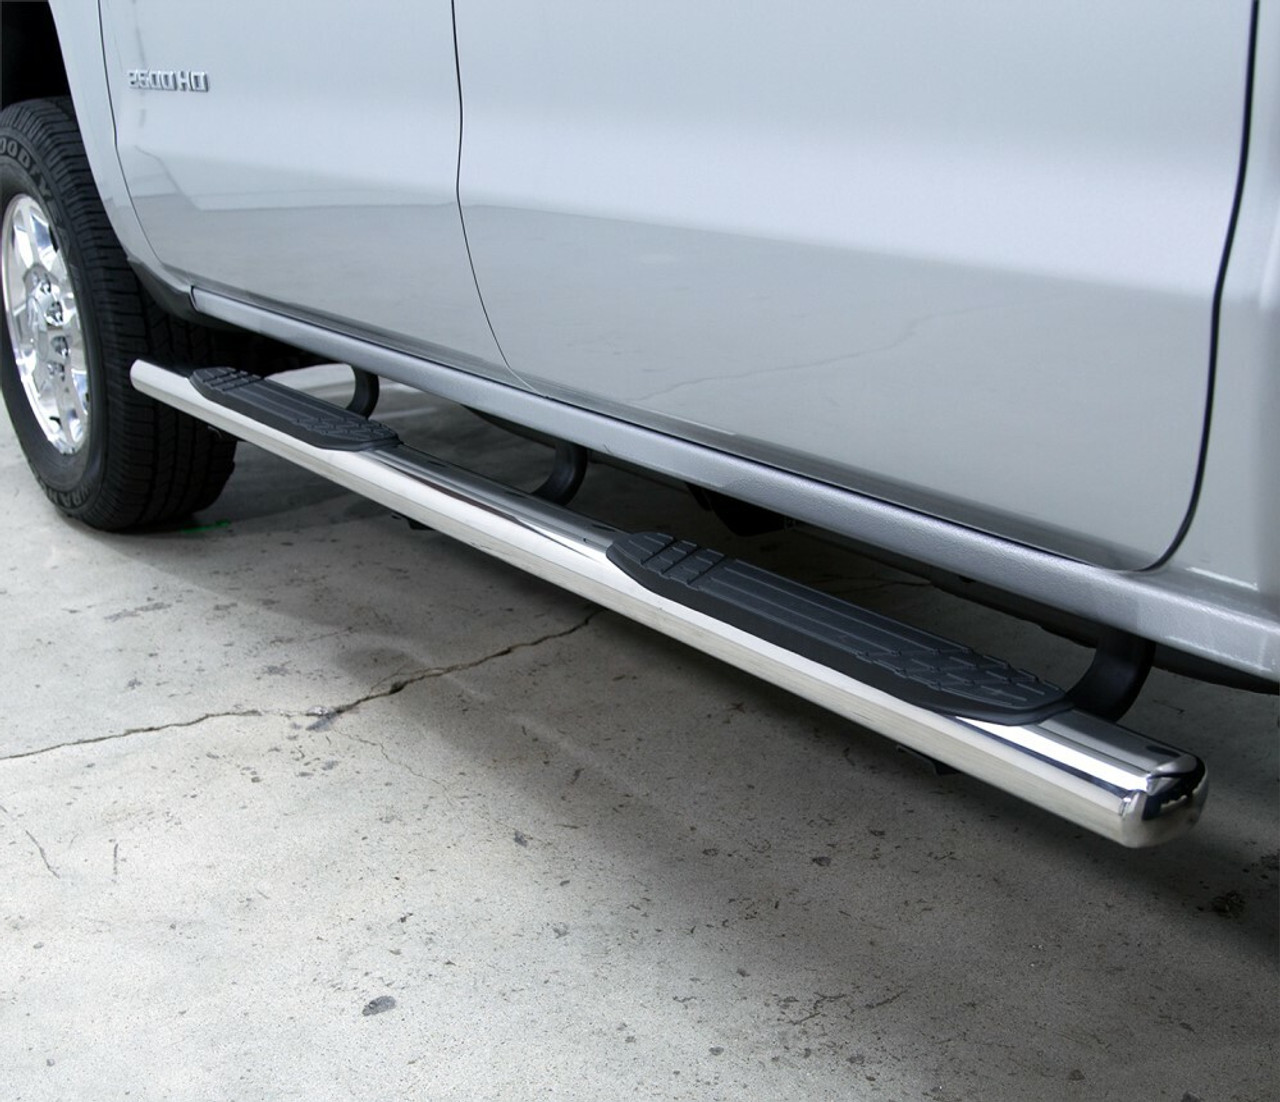 Go Rhino 684418080PS Ford, F-250, F-350 Super Duty, 1999 - 2016, 4 inch OE Xtreme - Complete Kit: Stainless steel, Polished, 640080PS side bars + 6841805 OE Xtreme Brackets. 4 inch wide x 80 inch long side bars. Welded end caps